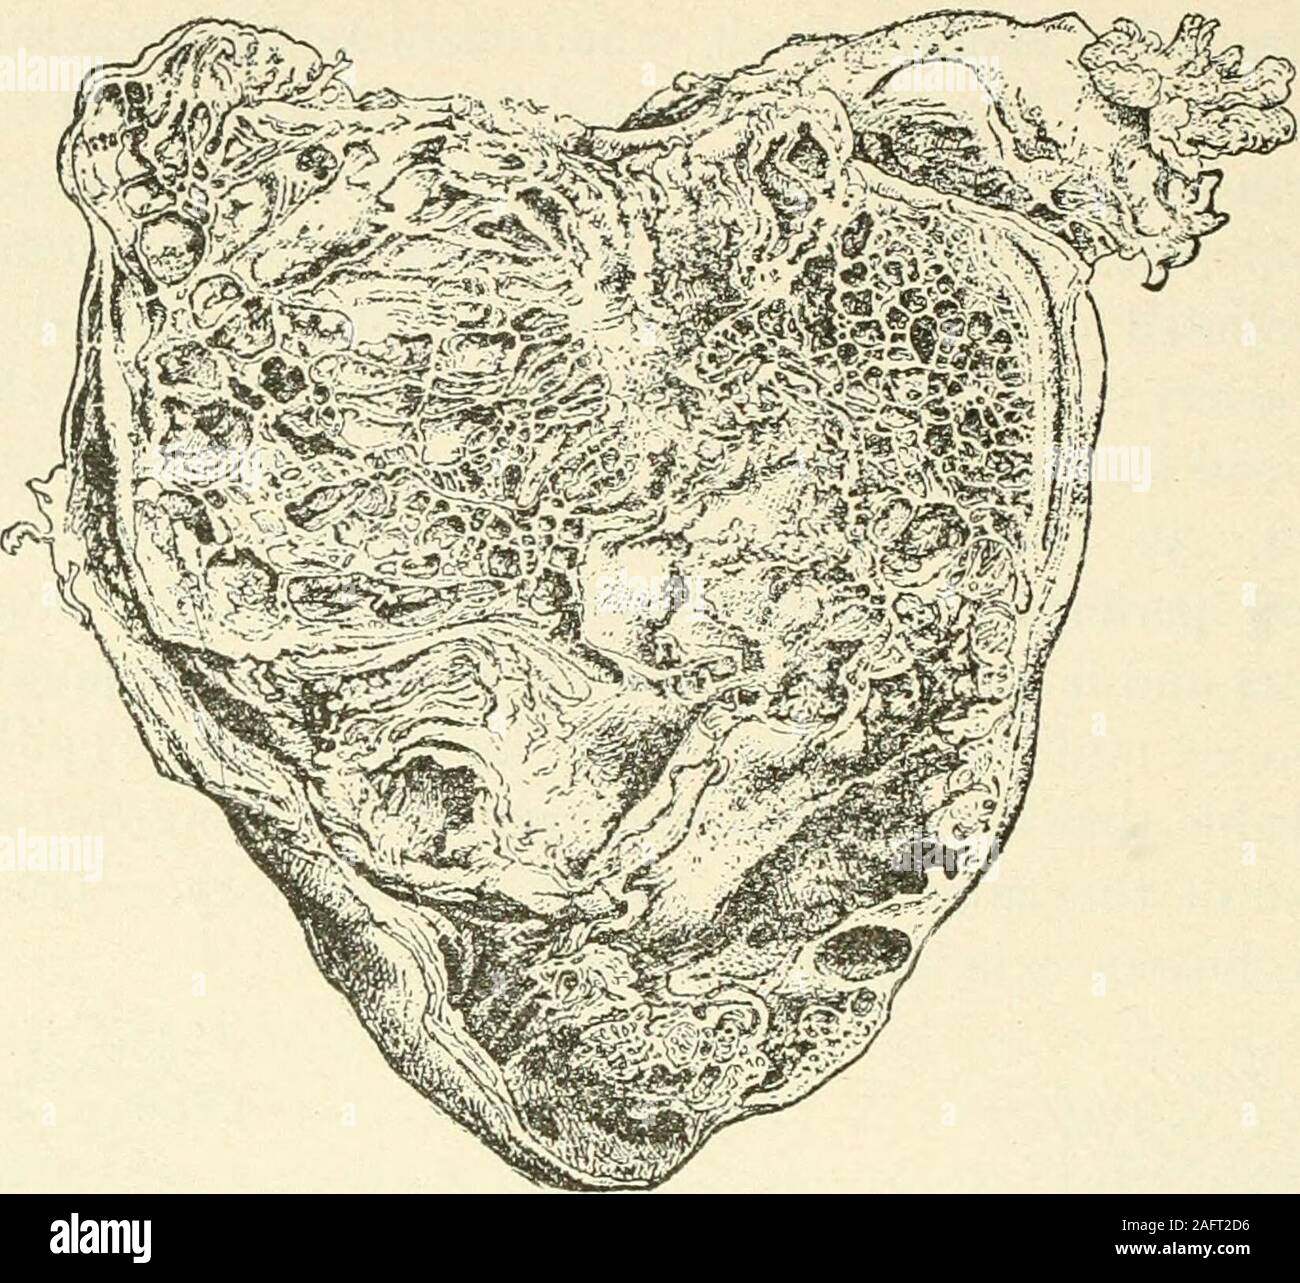 . Annual of the universal medical sciences. Fig. 2.—PAPiLiiOMA of the Ovary. {^New York Medical Journal. The malignant character of these growths is doubted byStewart Paton,„ii9 altliougli it is true that the tumors recur.While they begin on the ovary, growths may occur in the uterus,tubes, broad ligaments, bladder, and ovaries, or reflections of theperitoneum. Recurrence takes place by direct implantation, andnot by metastasis. There is no more clinical evidence for callinga papilloma malignant than there is for placing the myxo-adenomain the class of malignant neoplasms. In addition to the n Stock Photo